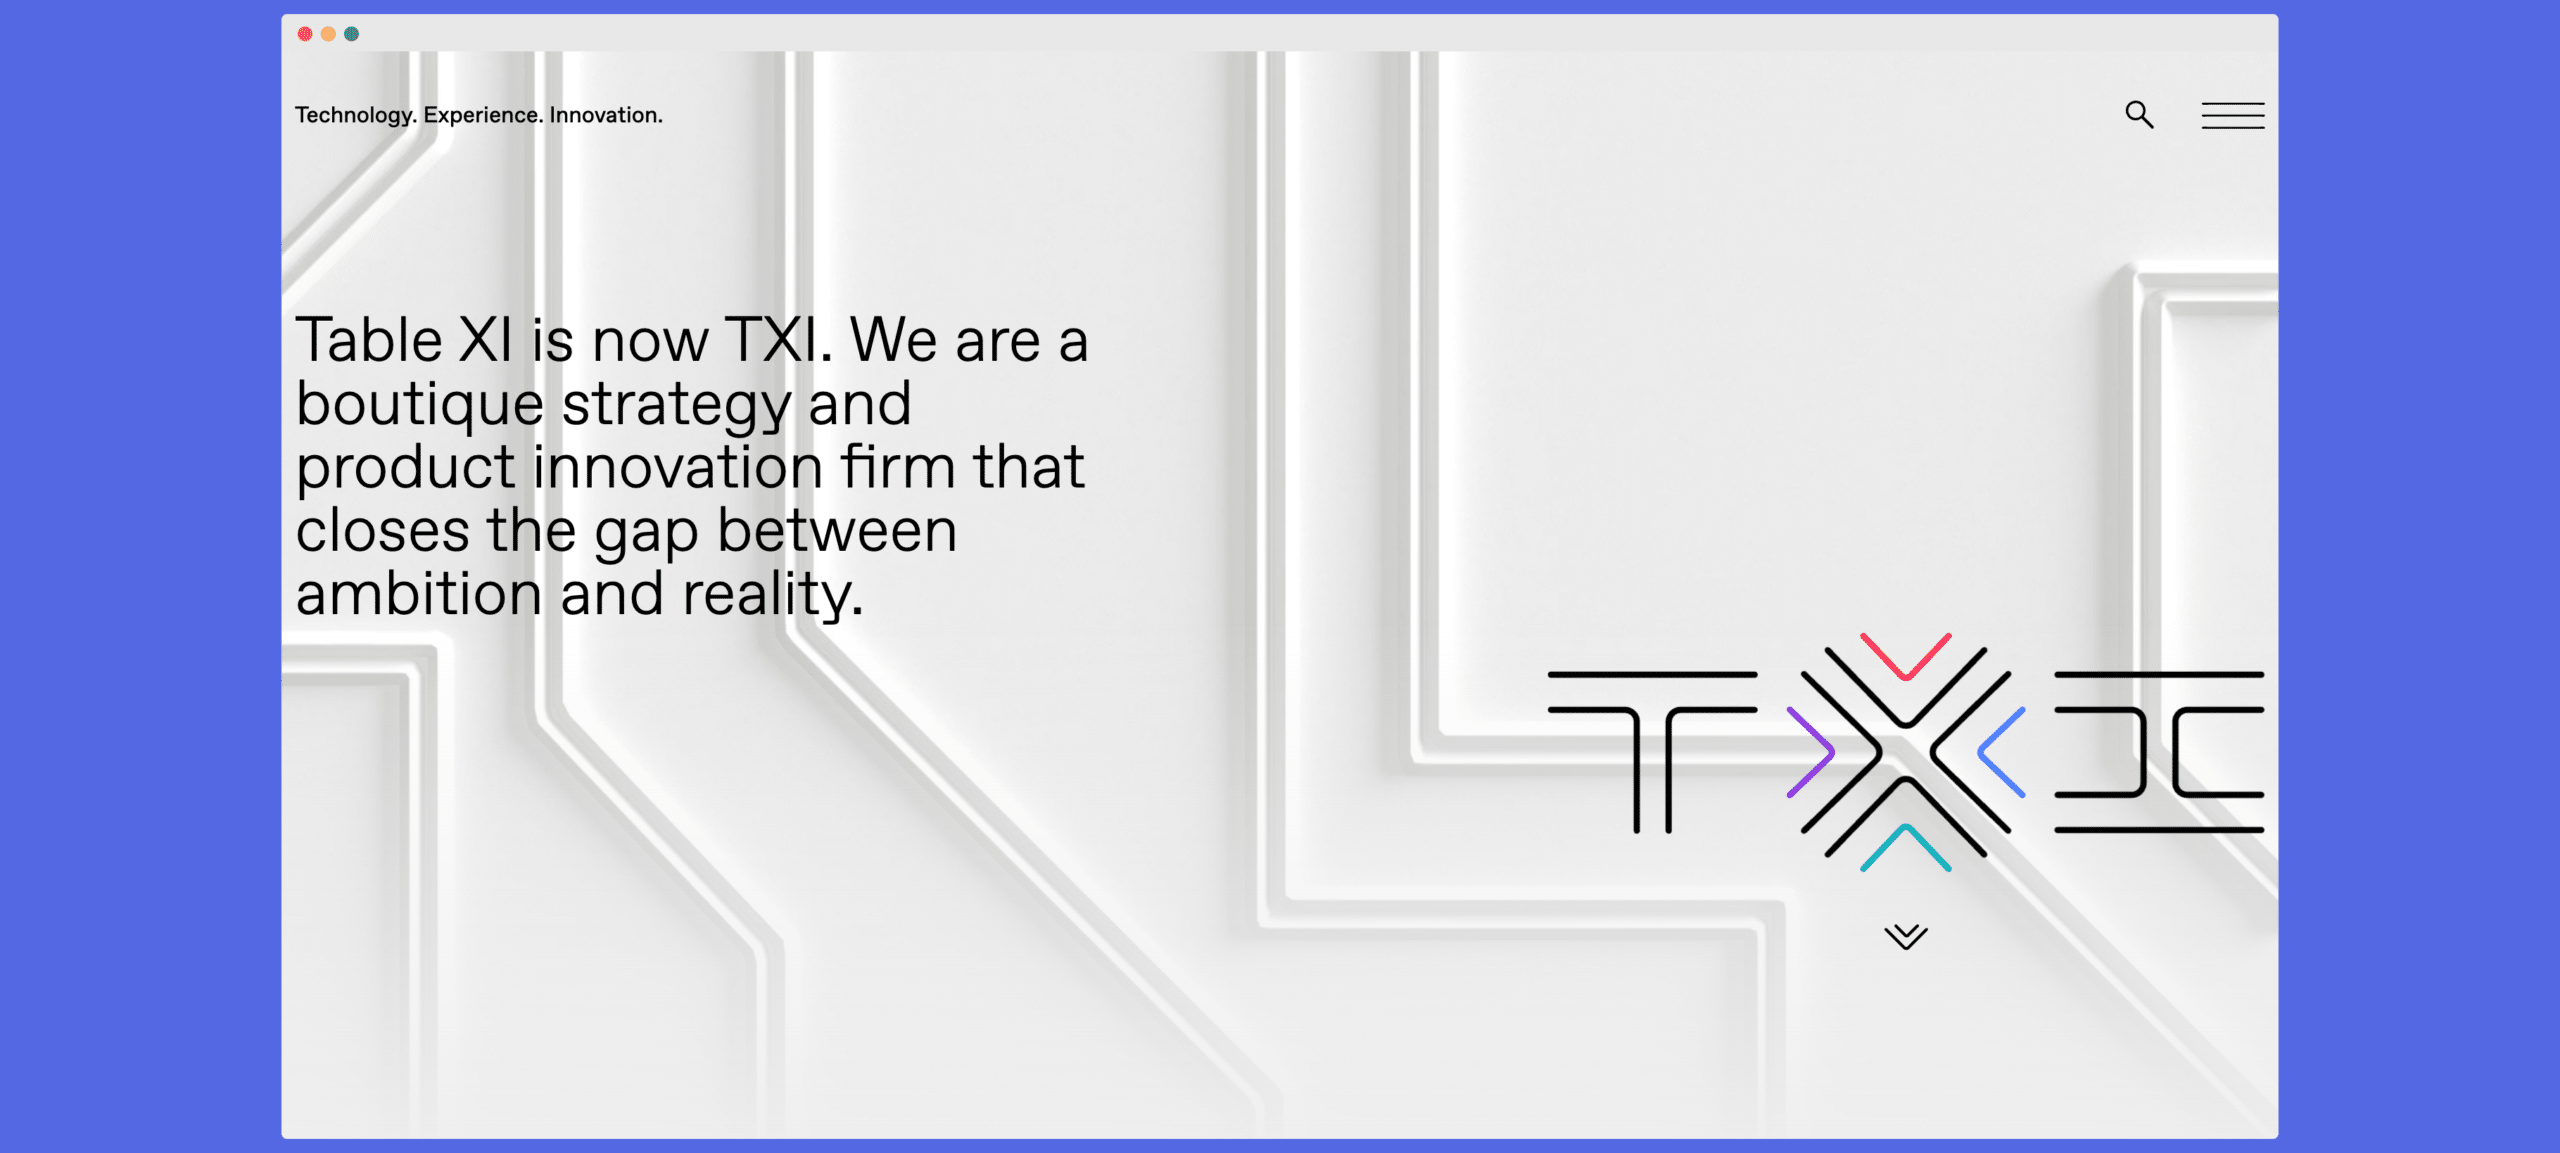 table xi - boutique strategy and product innovation firm website